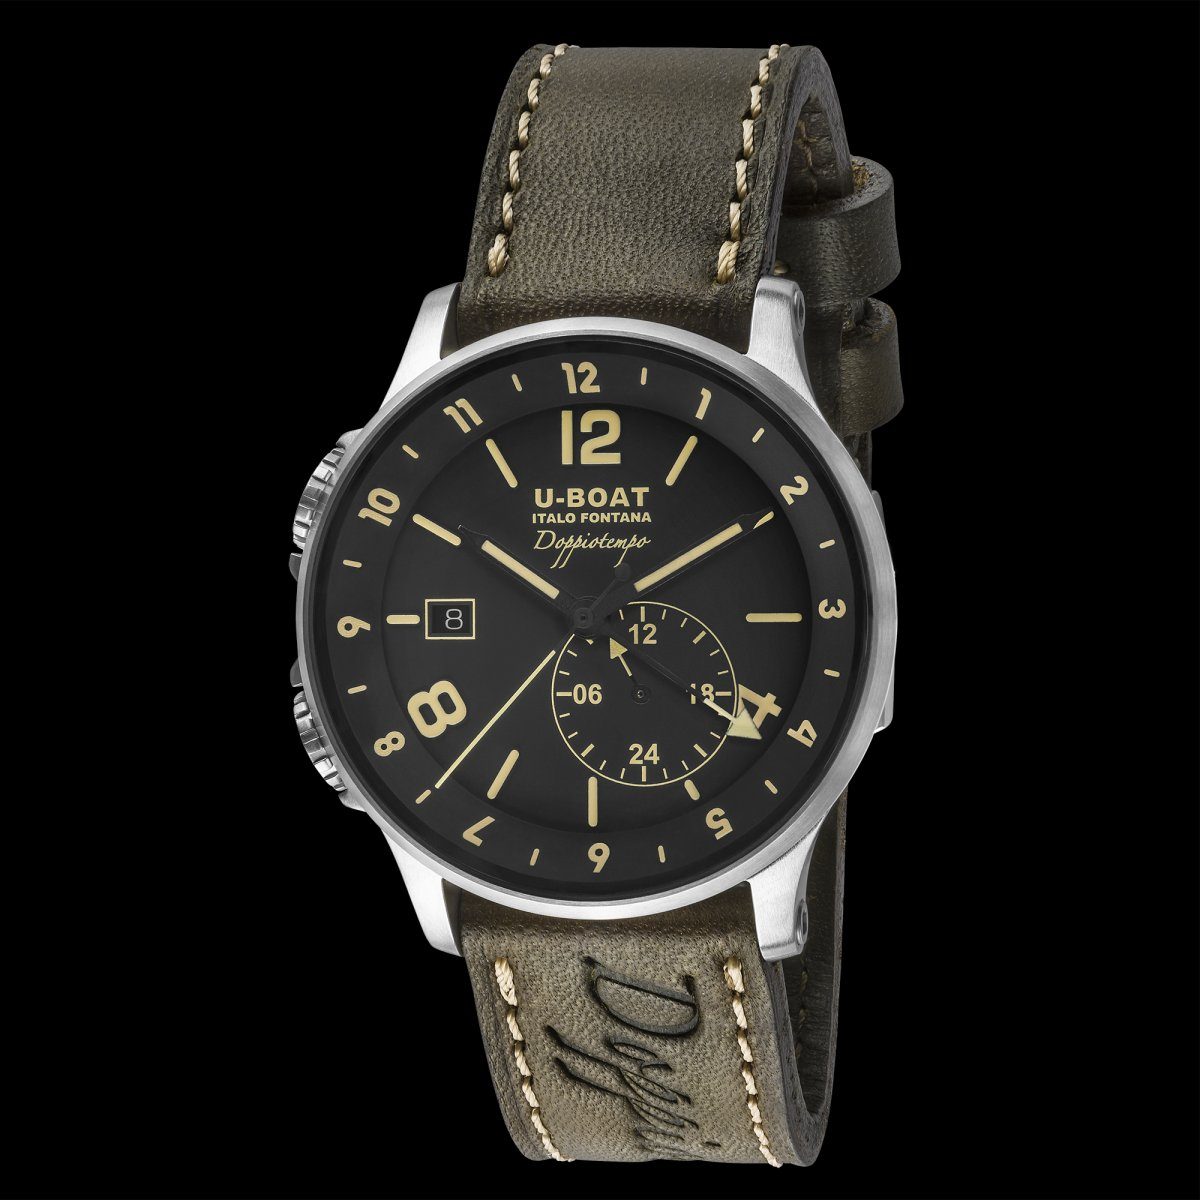 The 43 mm replica watch has black dial.